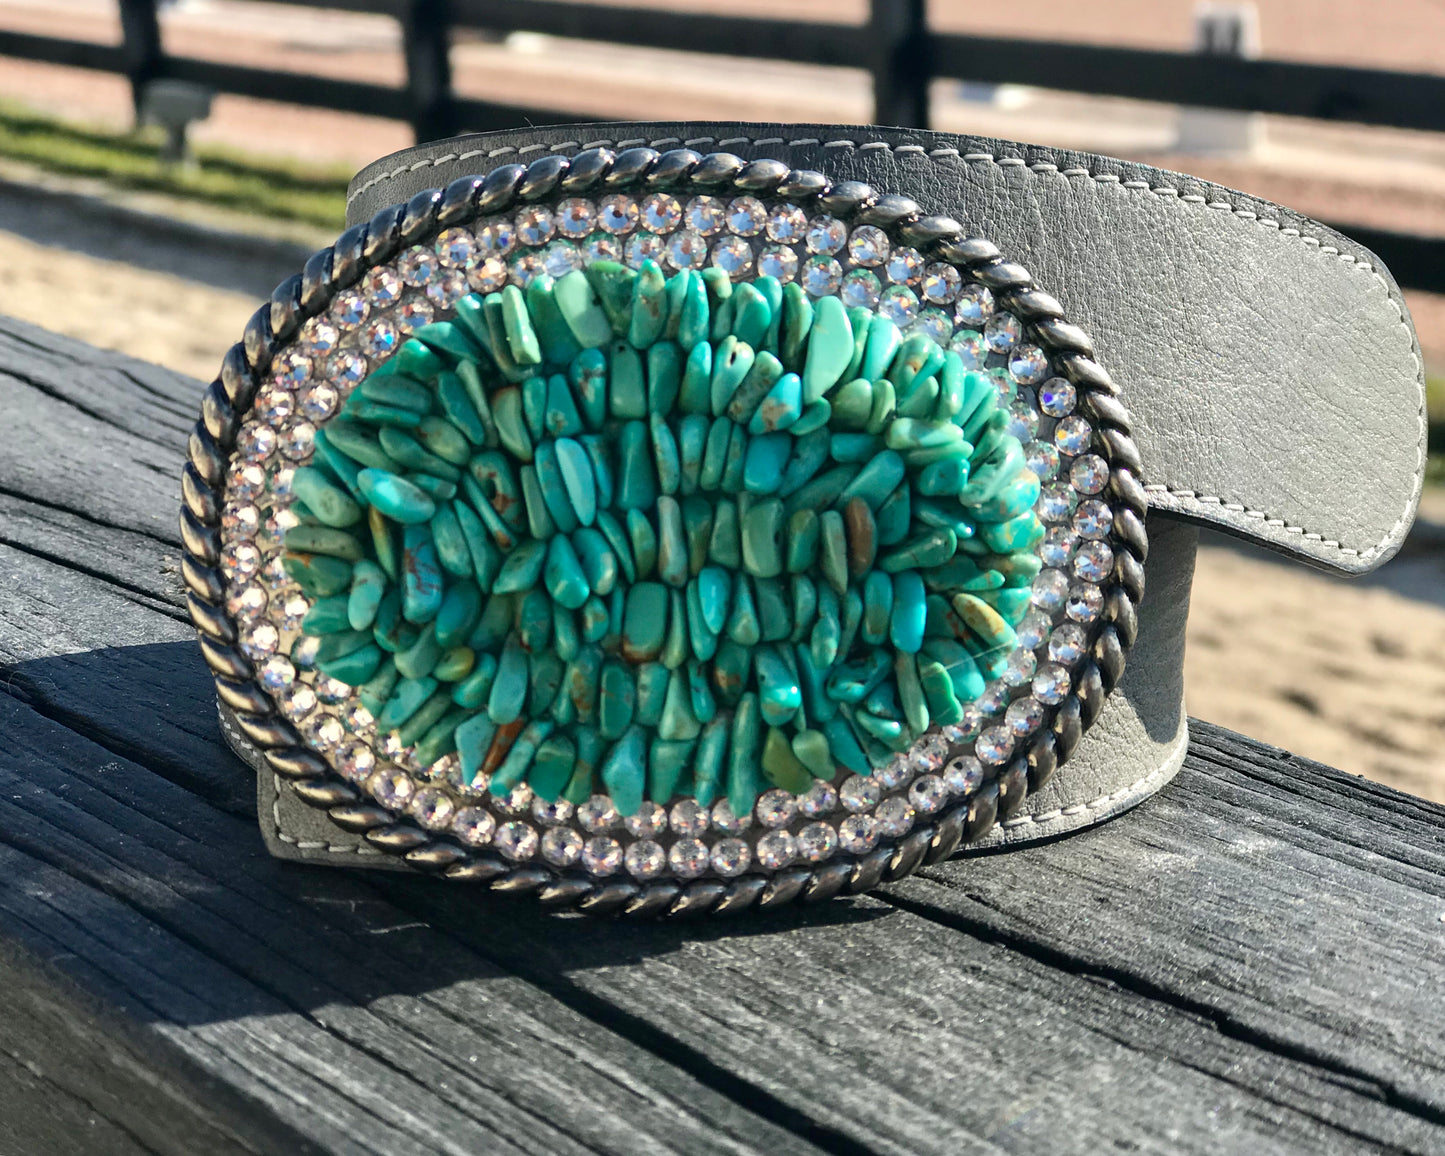 The Stoned Turquoise with Clear Swarovski Crystals